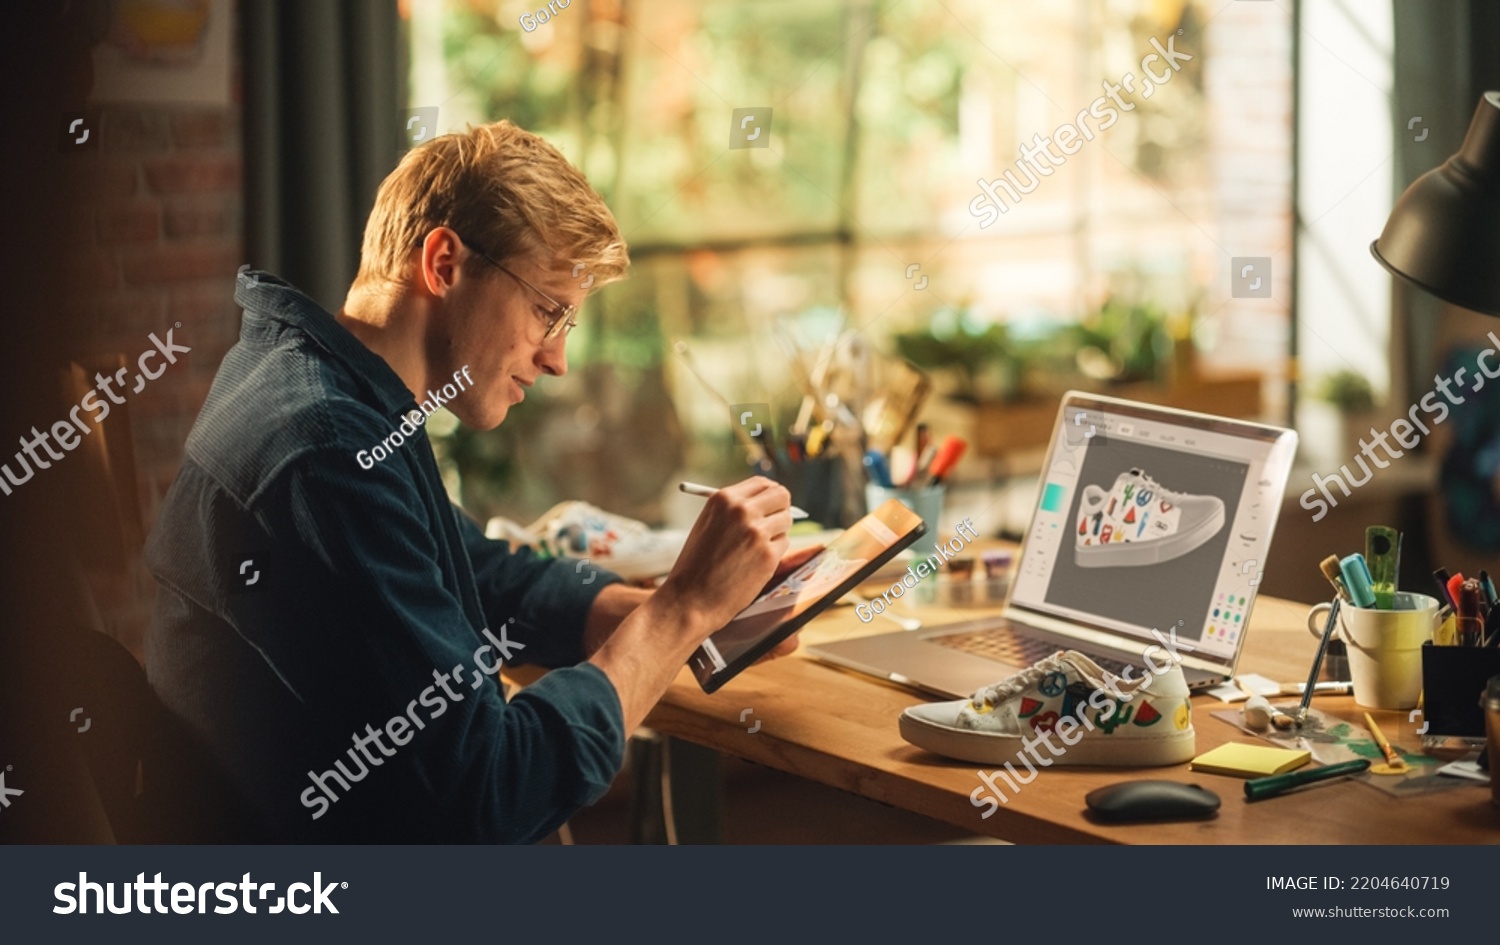 Experienced Male Teen Designer Works With Digital Graphics Tablet Touchscreen, Drawing Sketch of a New Unique Shoes Design. 3D Prototype of his Product in Editing Software on Laptop Display. #2204640719